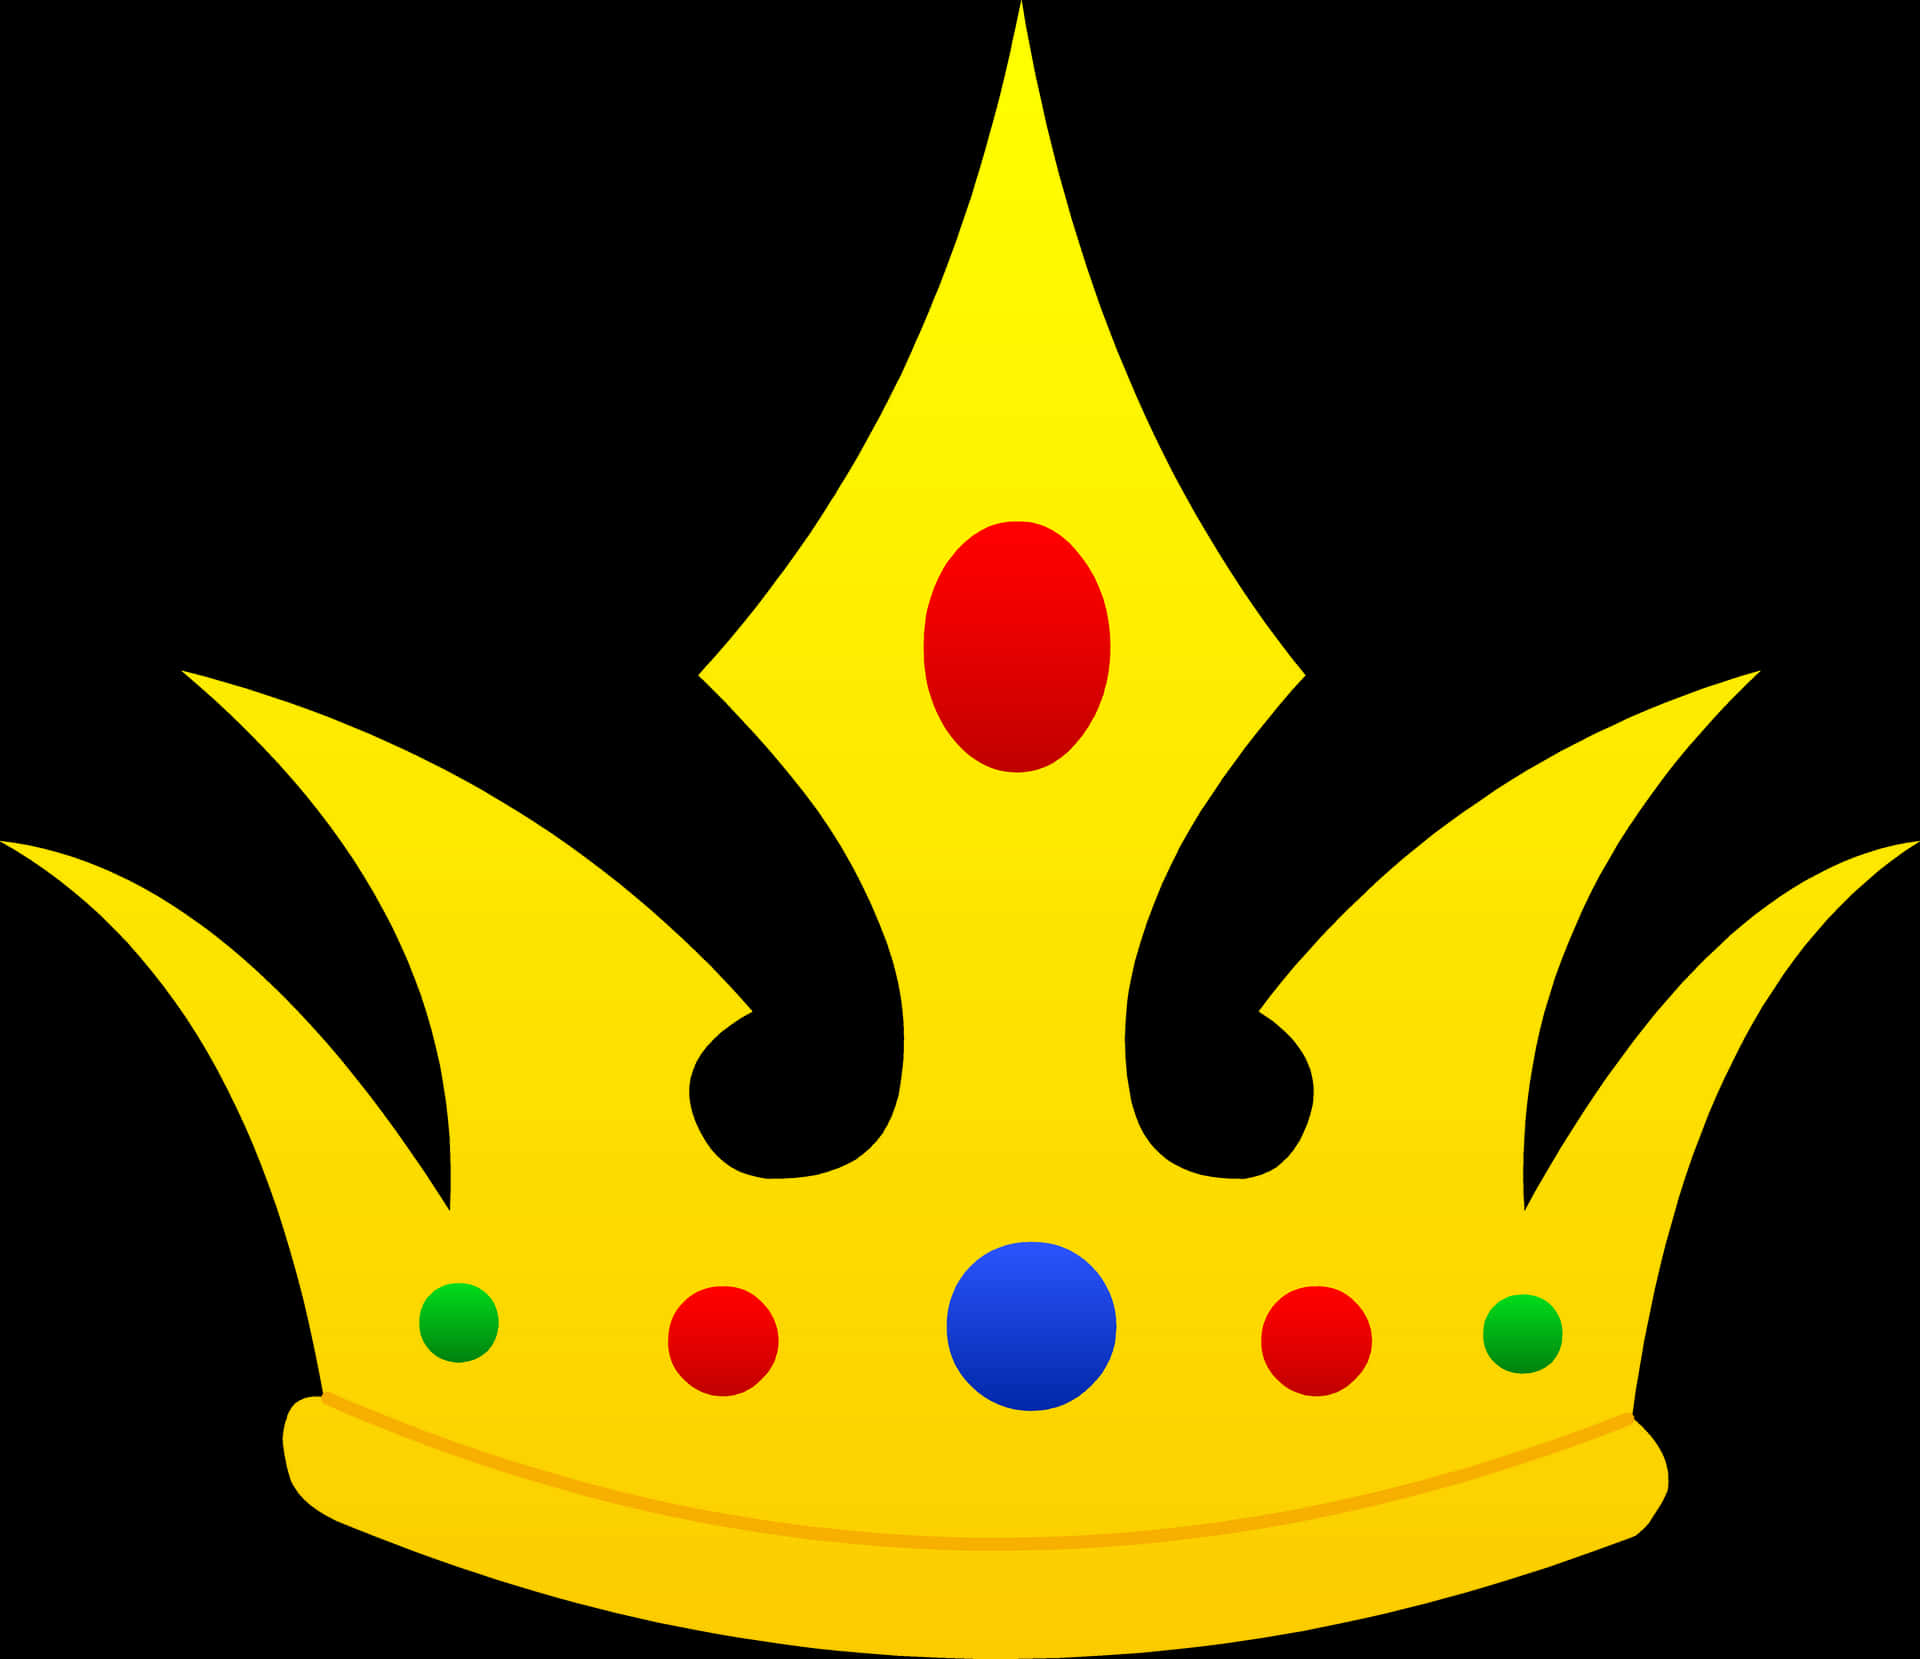 Colorful Cartoon Crown PNG image